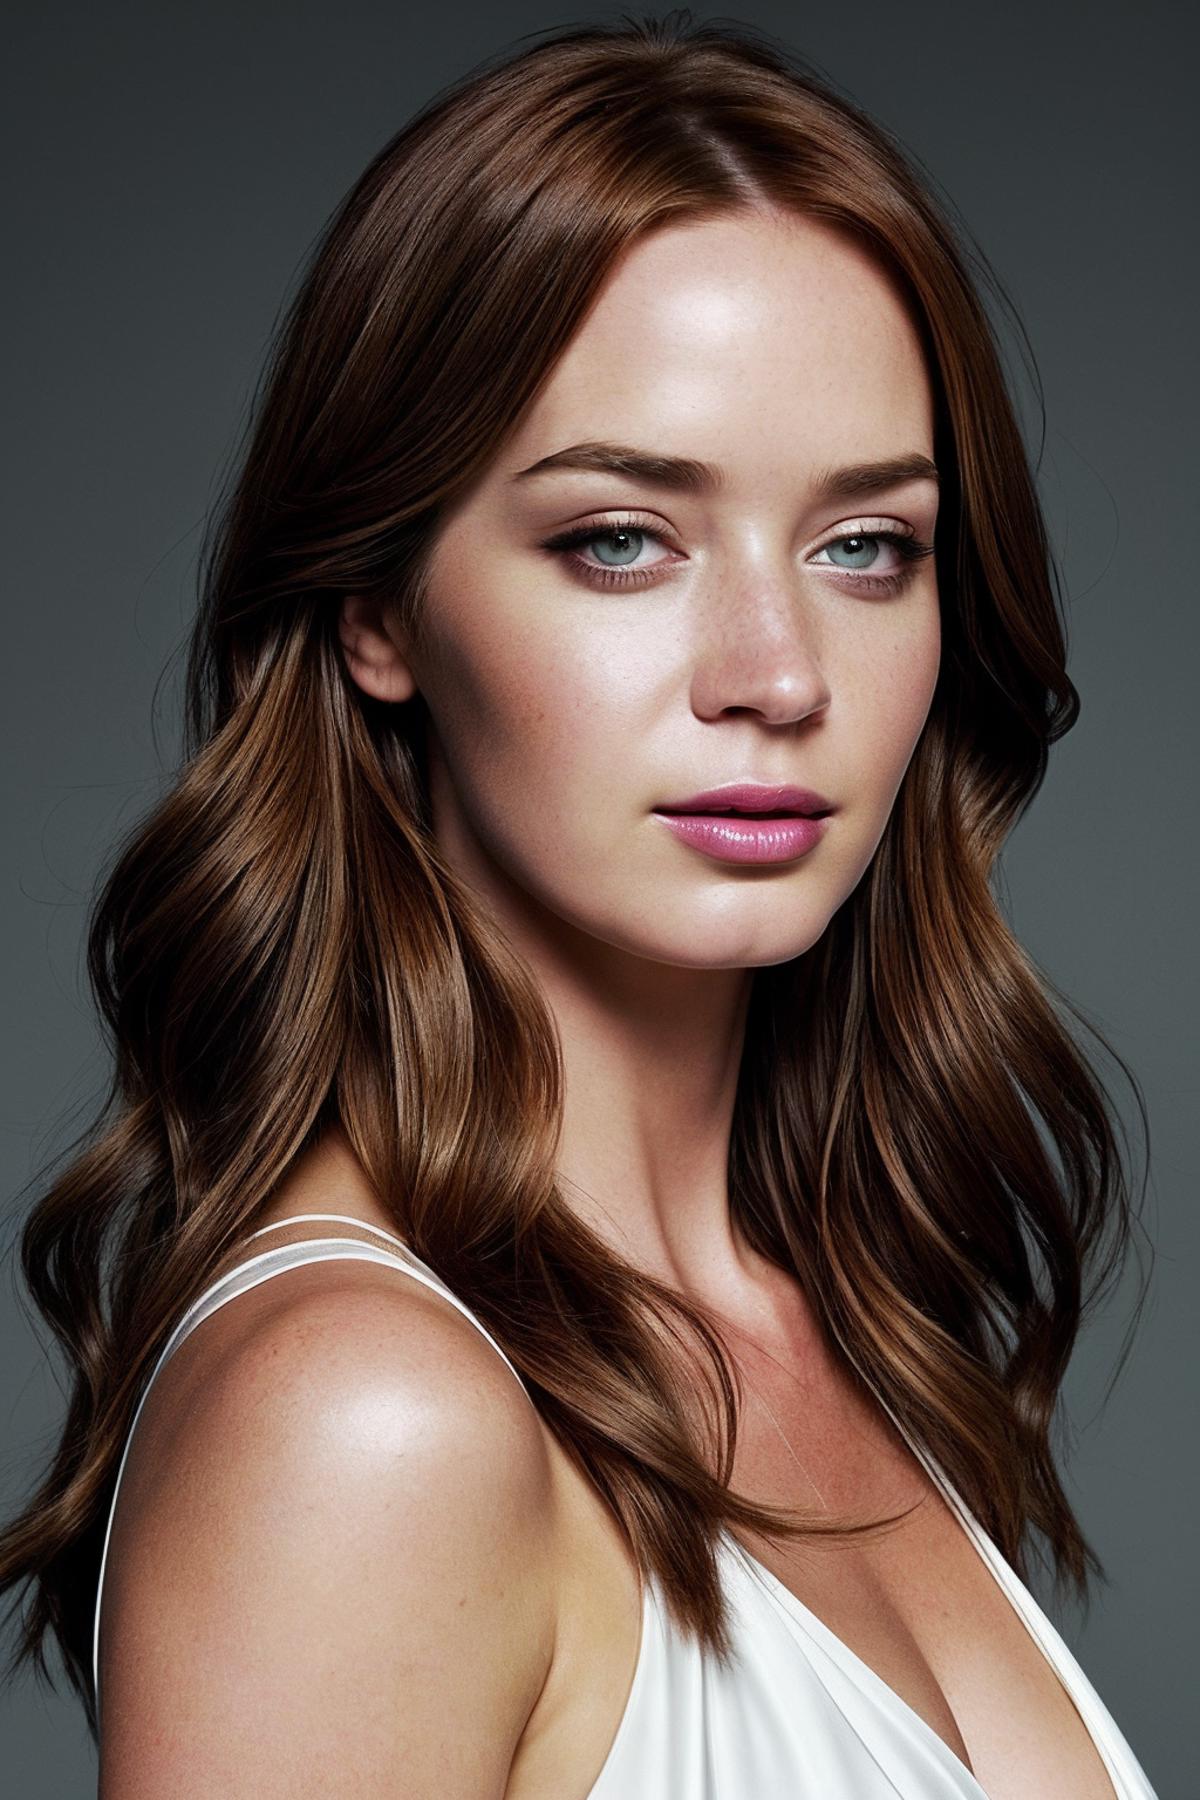 Emily Blunt image by solo_lee